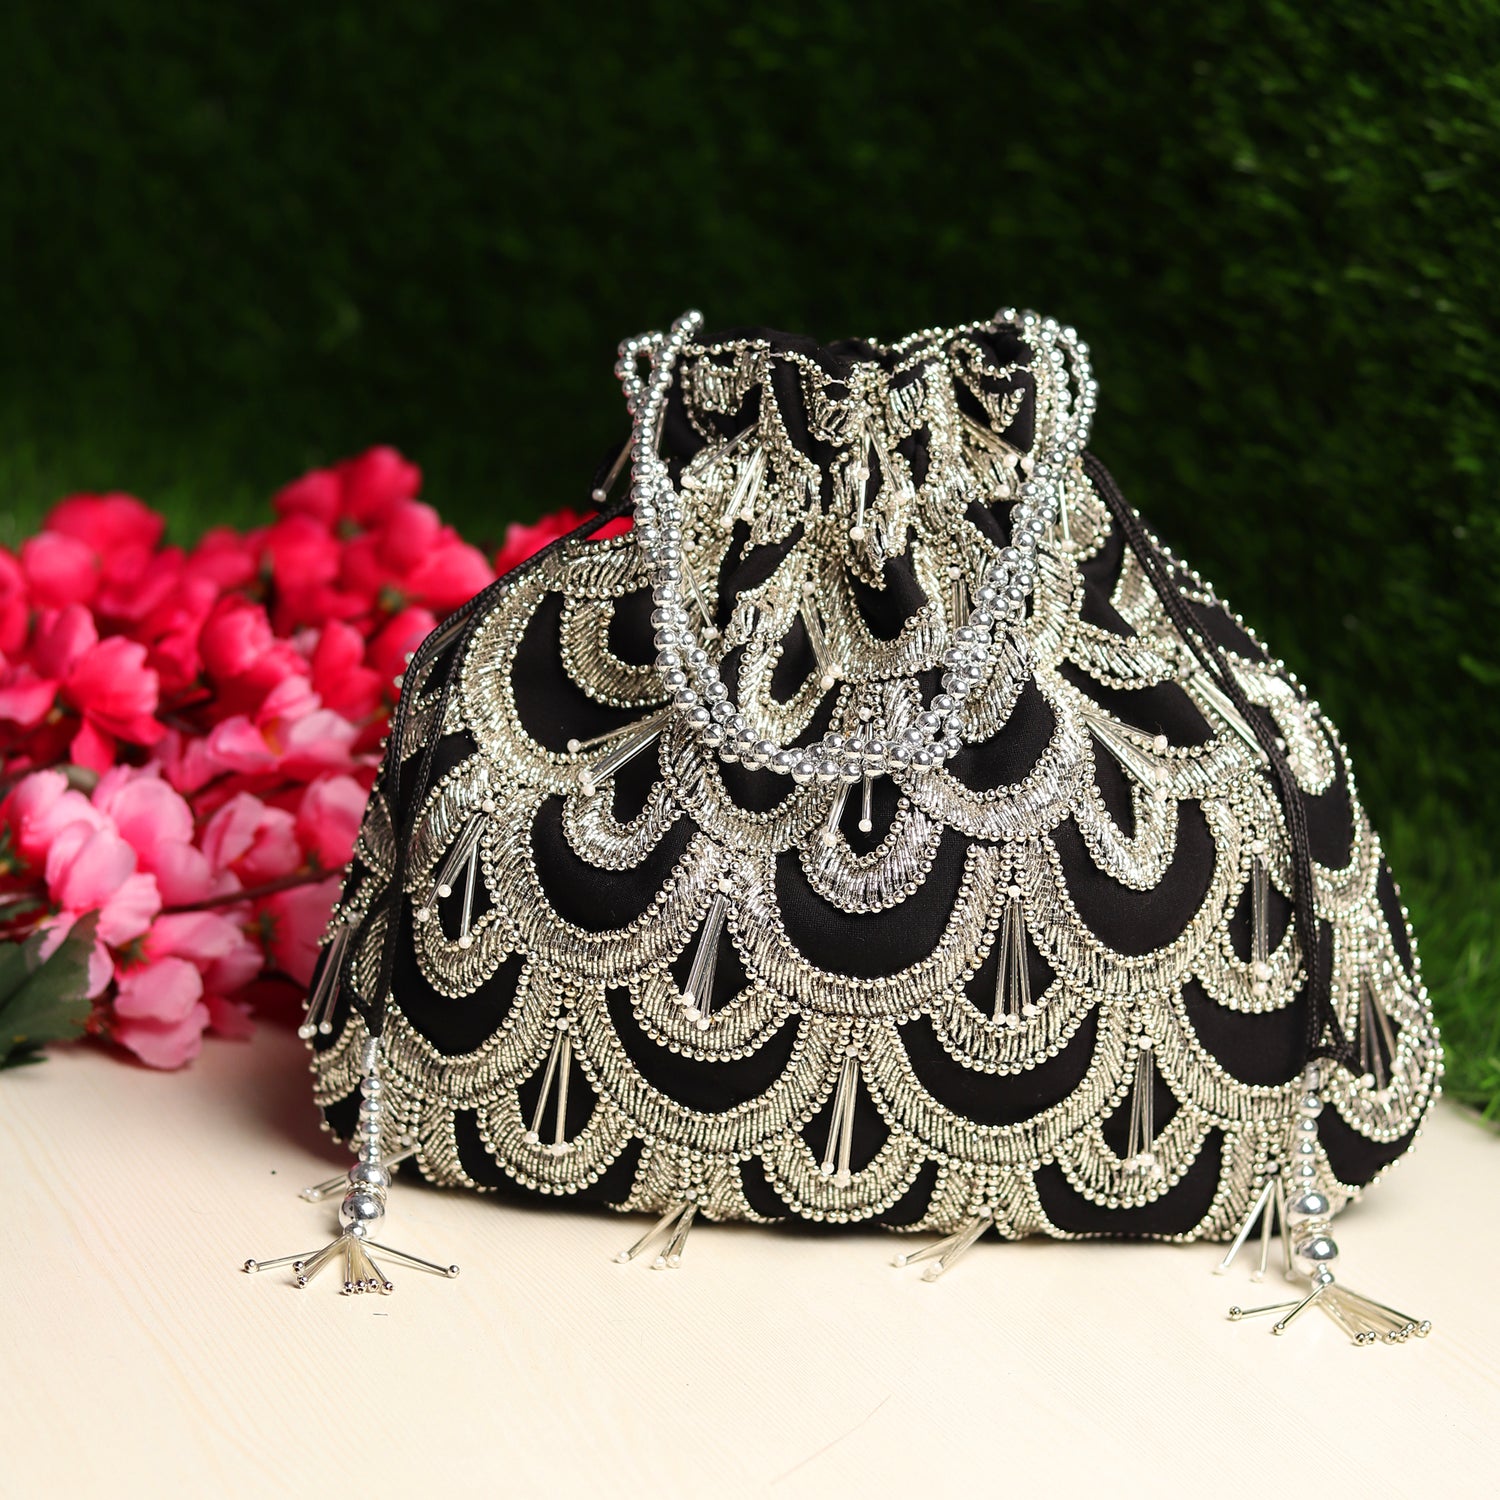 White Sequin Dinner Bag Glamorous Shiny Handbag With Chain Strap, Perfect Bride  Purse For Wedding, Prom & Party Events | SHEIN ASIA